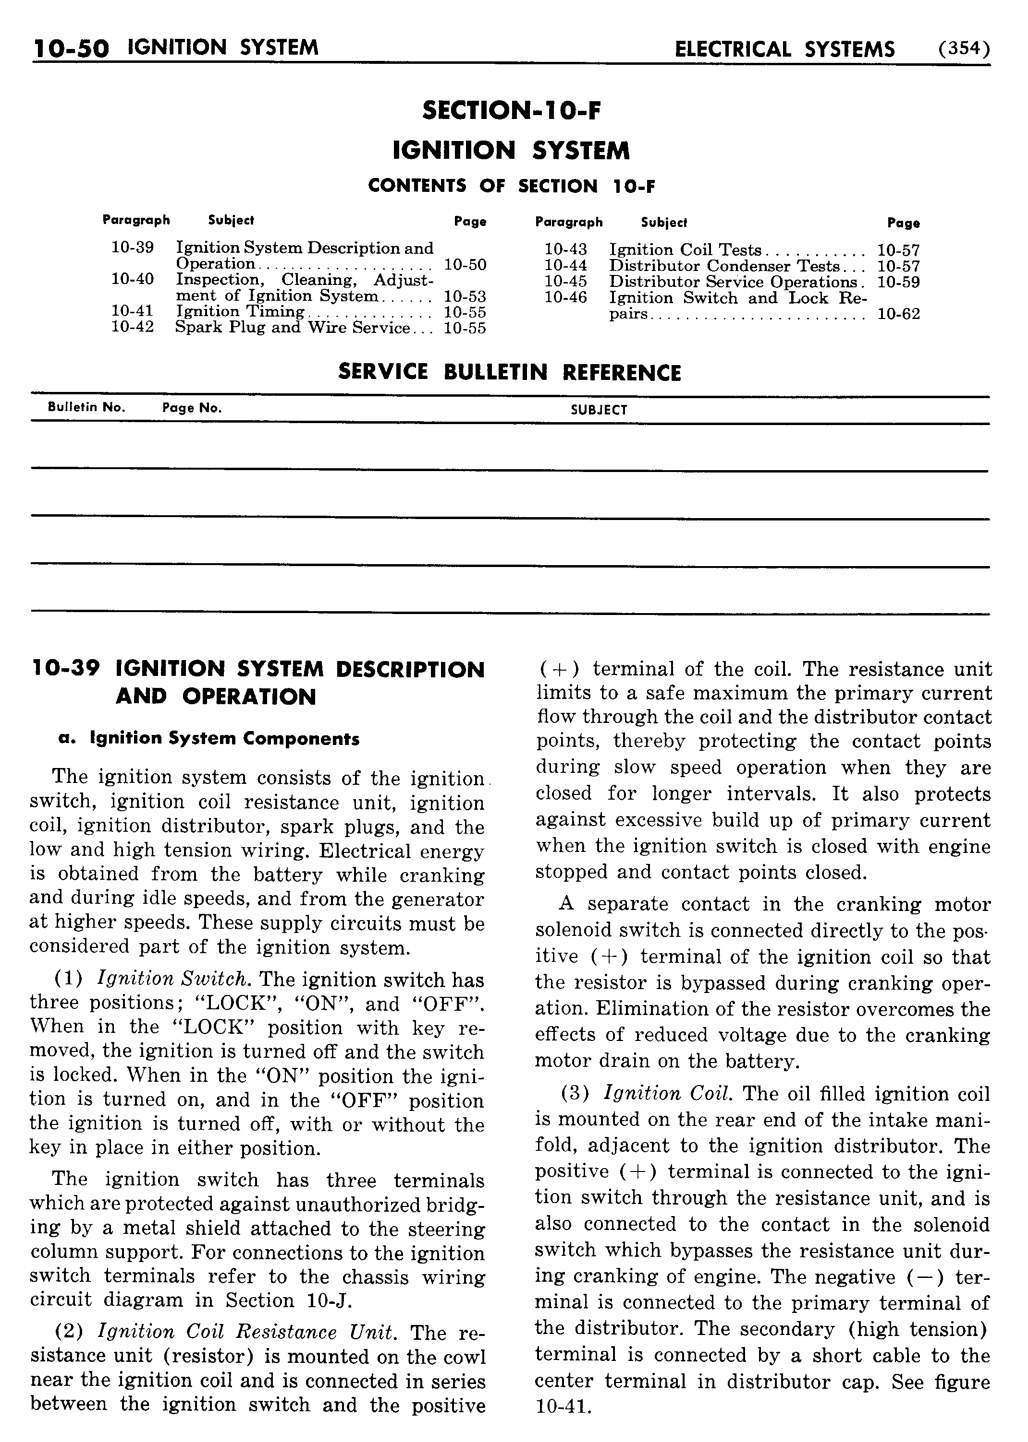 n_11 1955 Buick Shop Manual - Electrical Systems-050-050.jpg